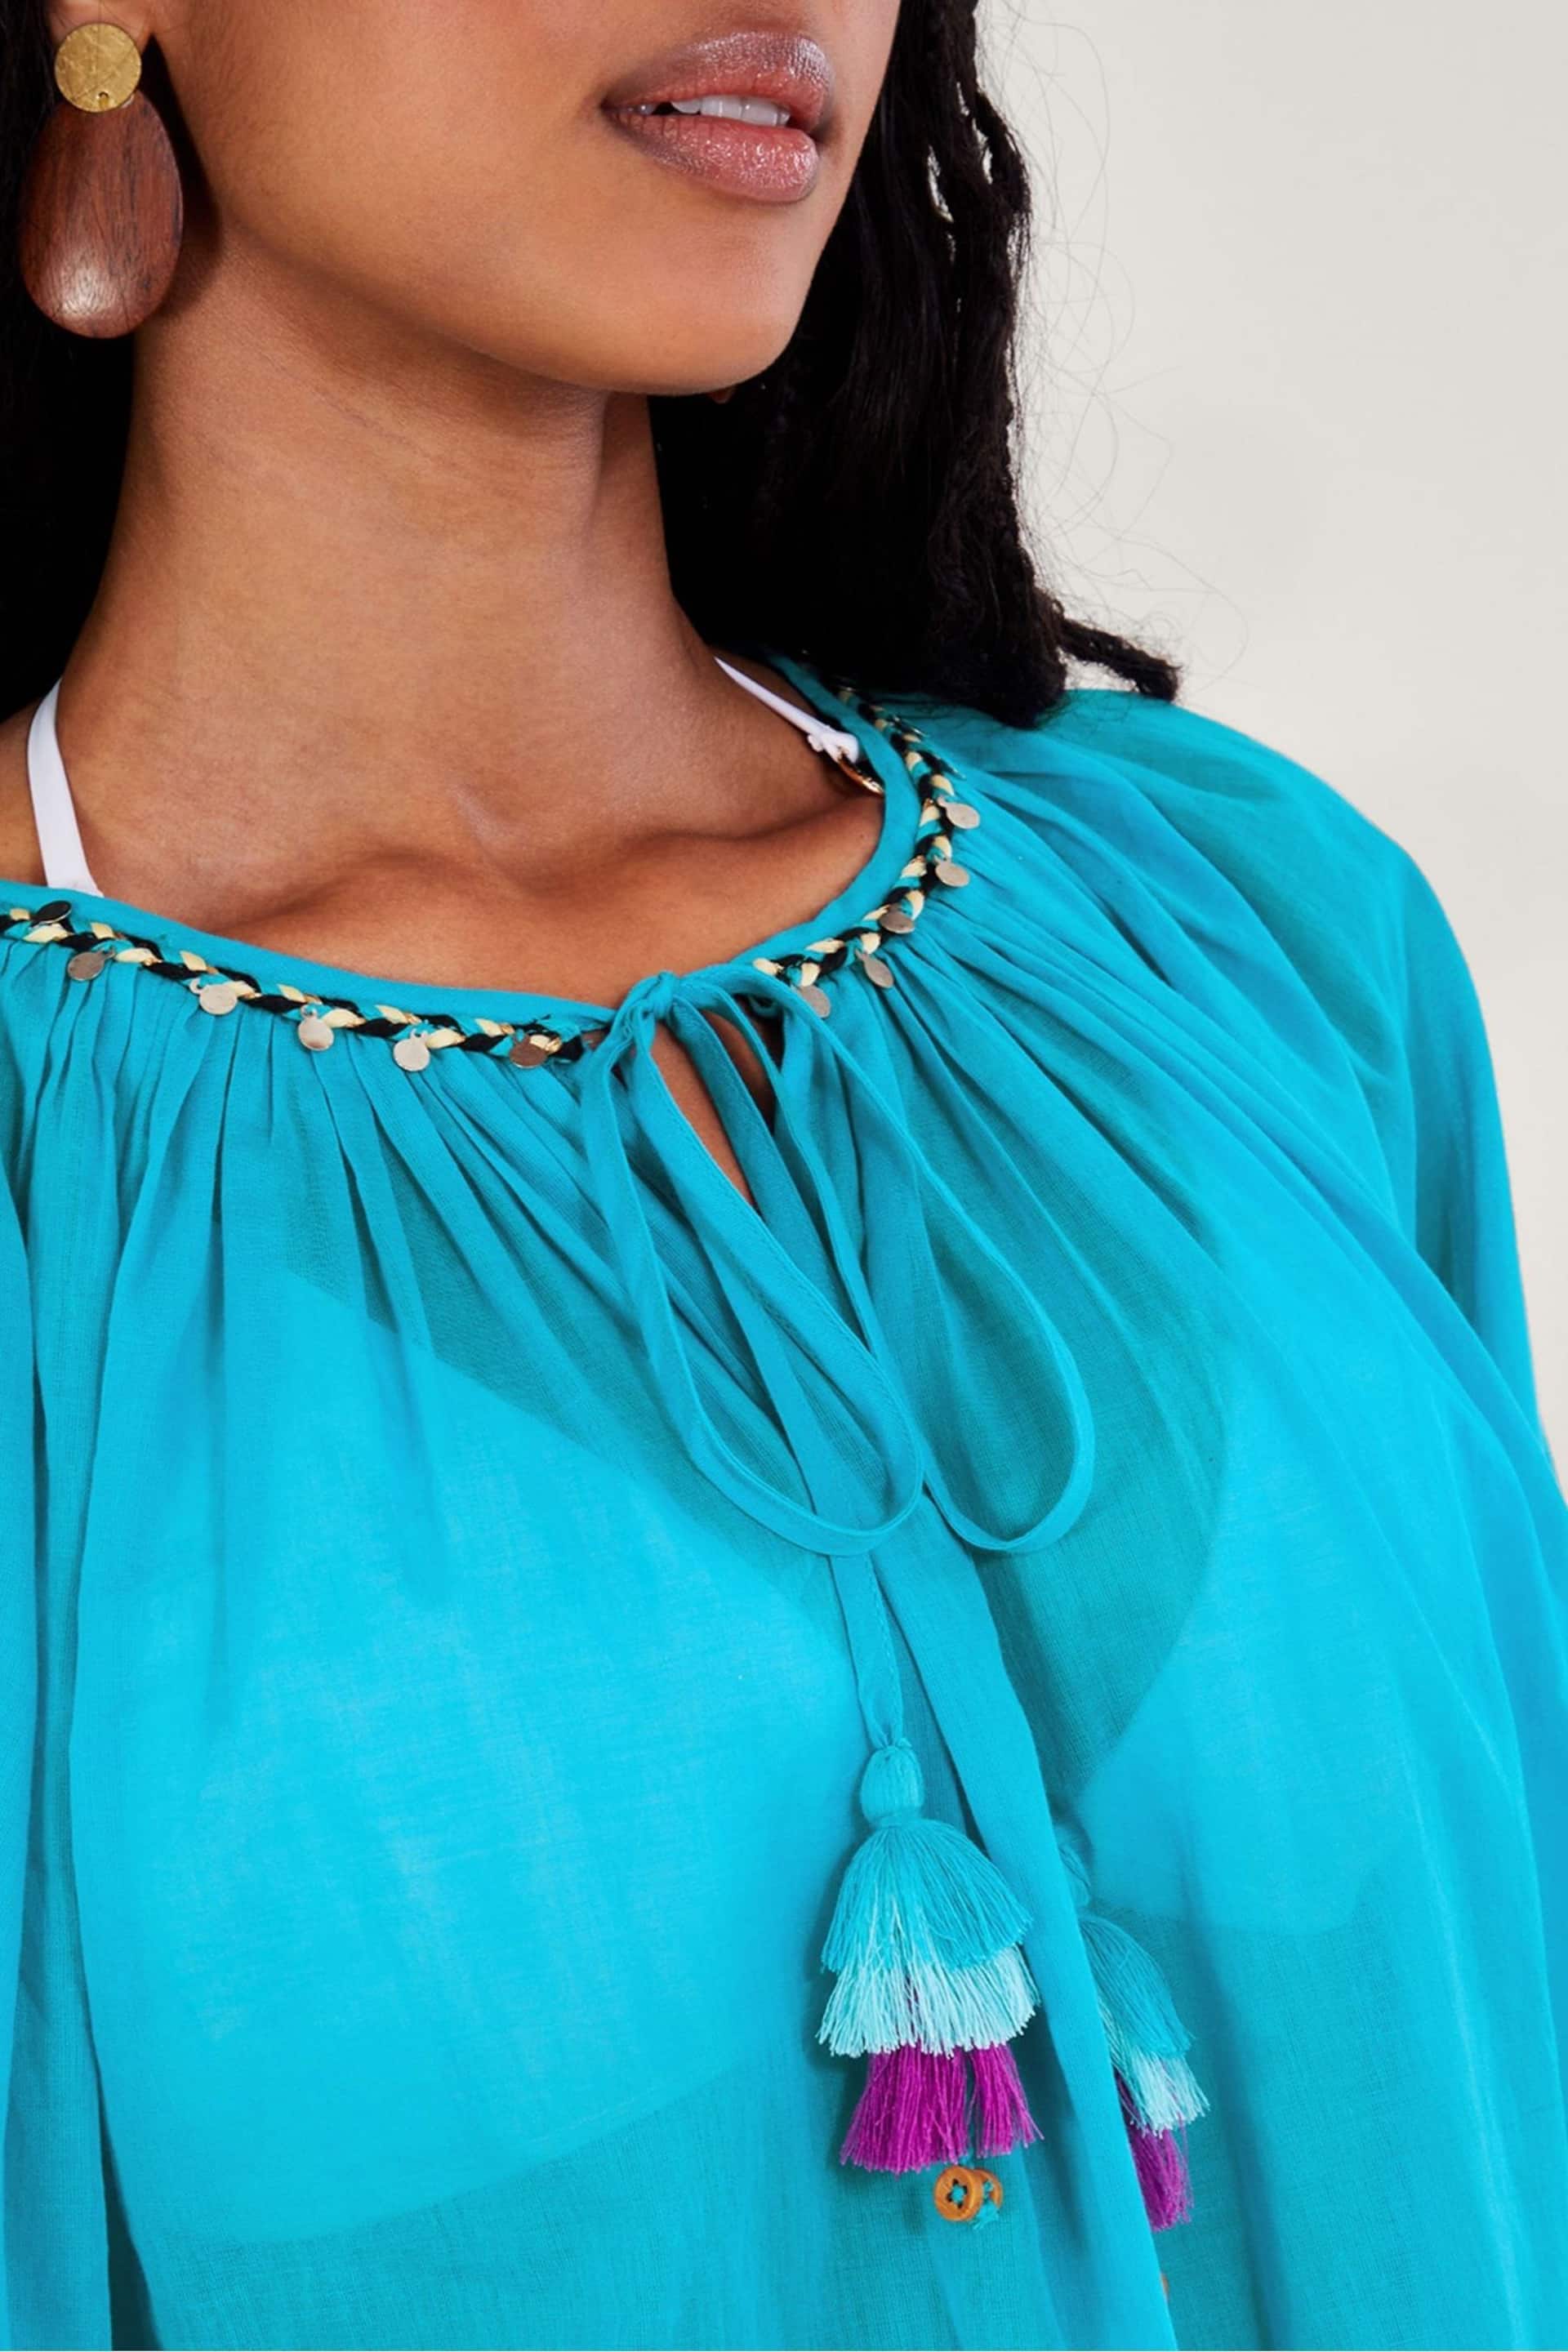 Monsoon Blue Amy Tie Neck Top - Image 4 of 4